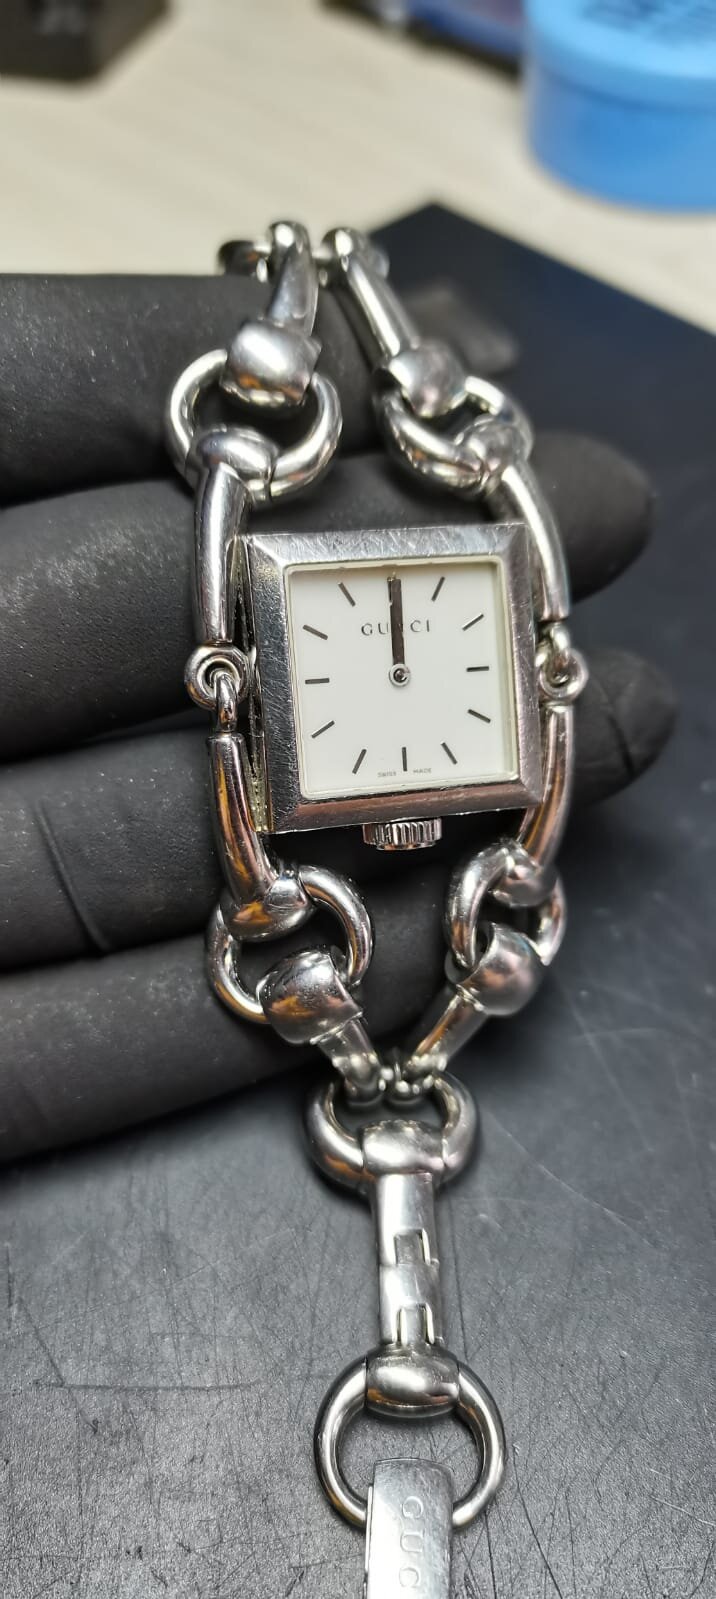 Gucci horsebit watch  11479294 repair in for Service, Clean, Polish  and a bracelet repair from Gravesend, Kent. | Watches Fixed | Watch Repairs  | Latest Watch News | Watch Hub